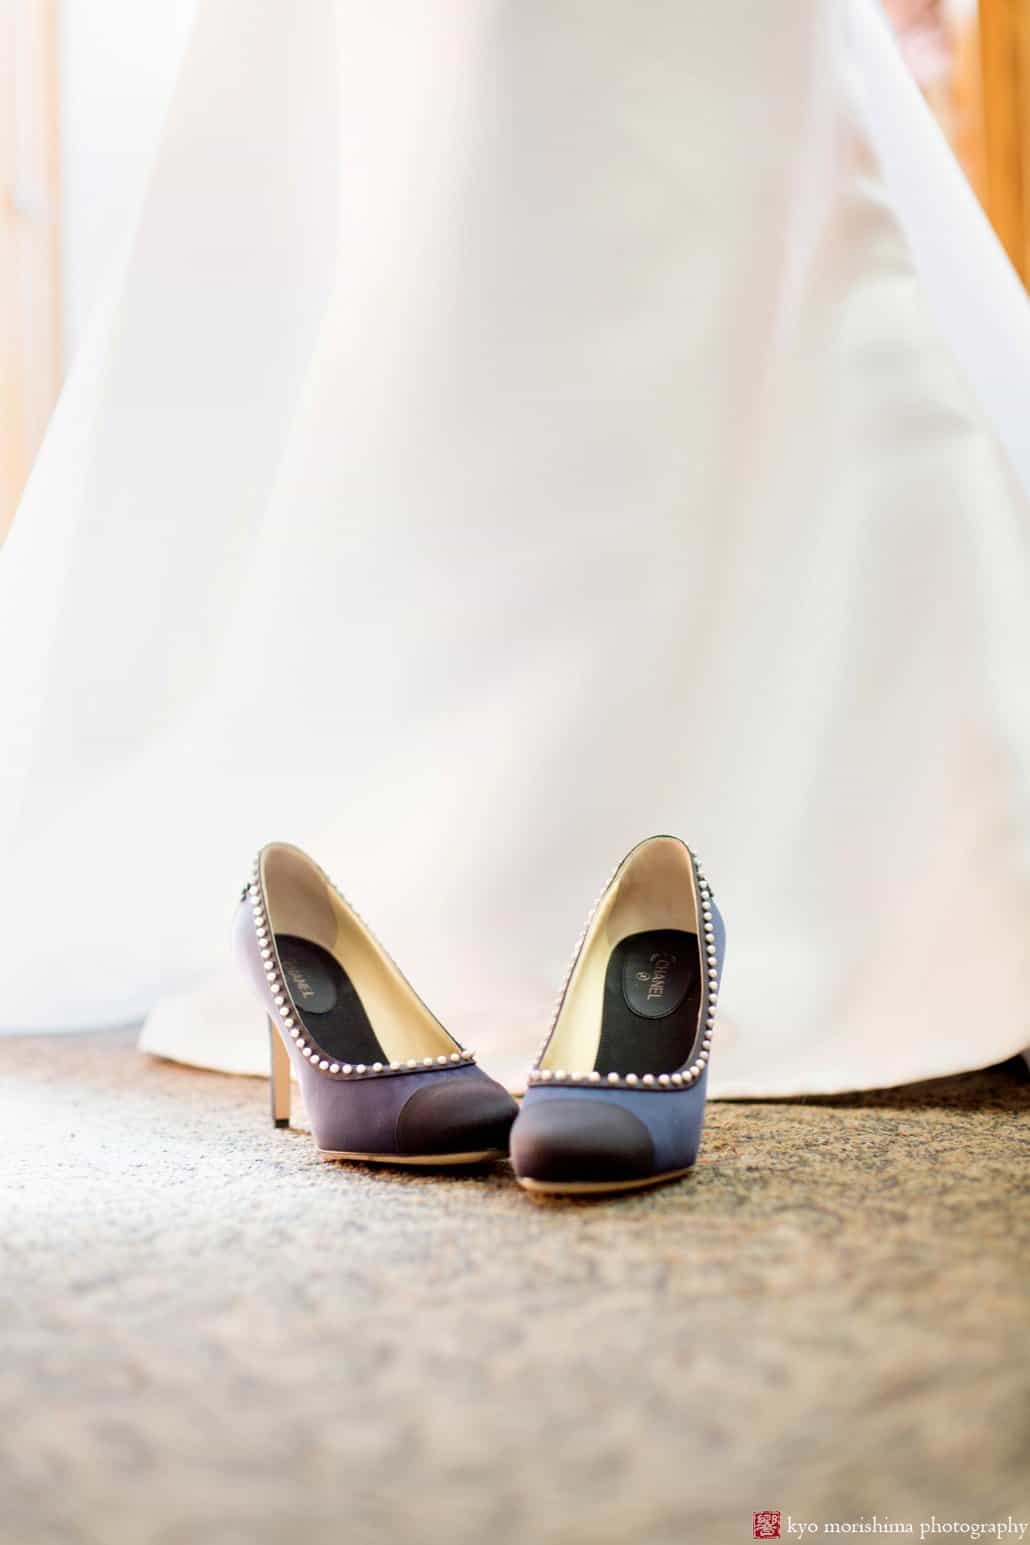 Navy blue Chanel heels with Pronovias wedding dress in the background, photographed by Kyo Morishima at St. John the Divine